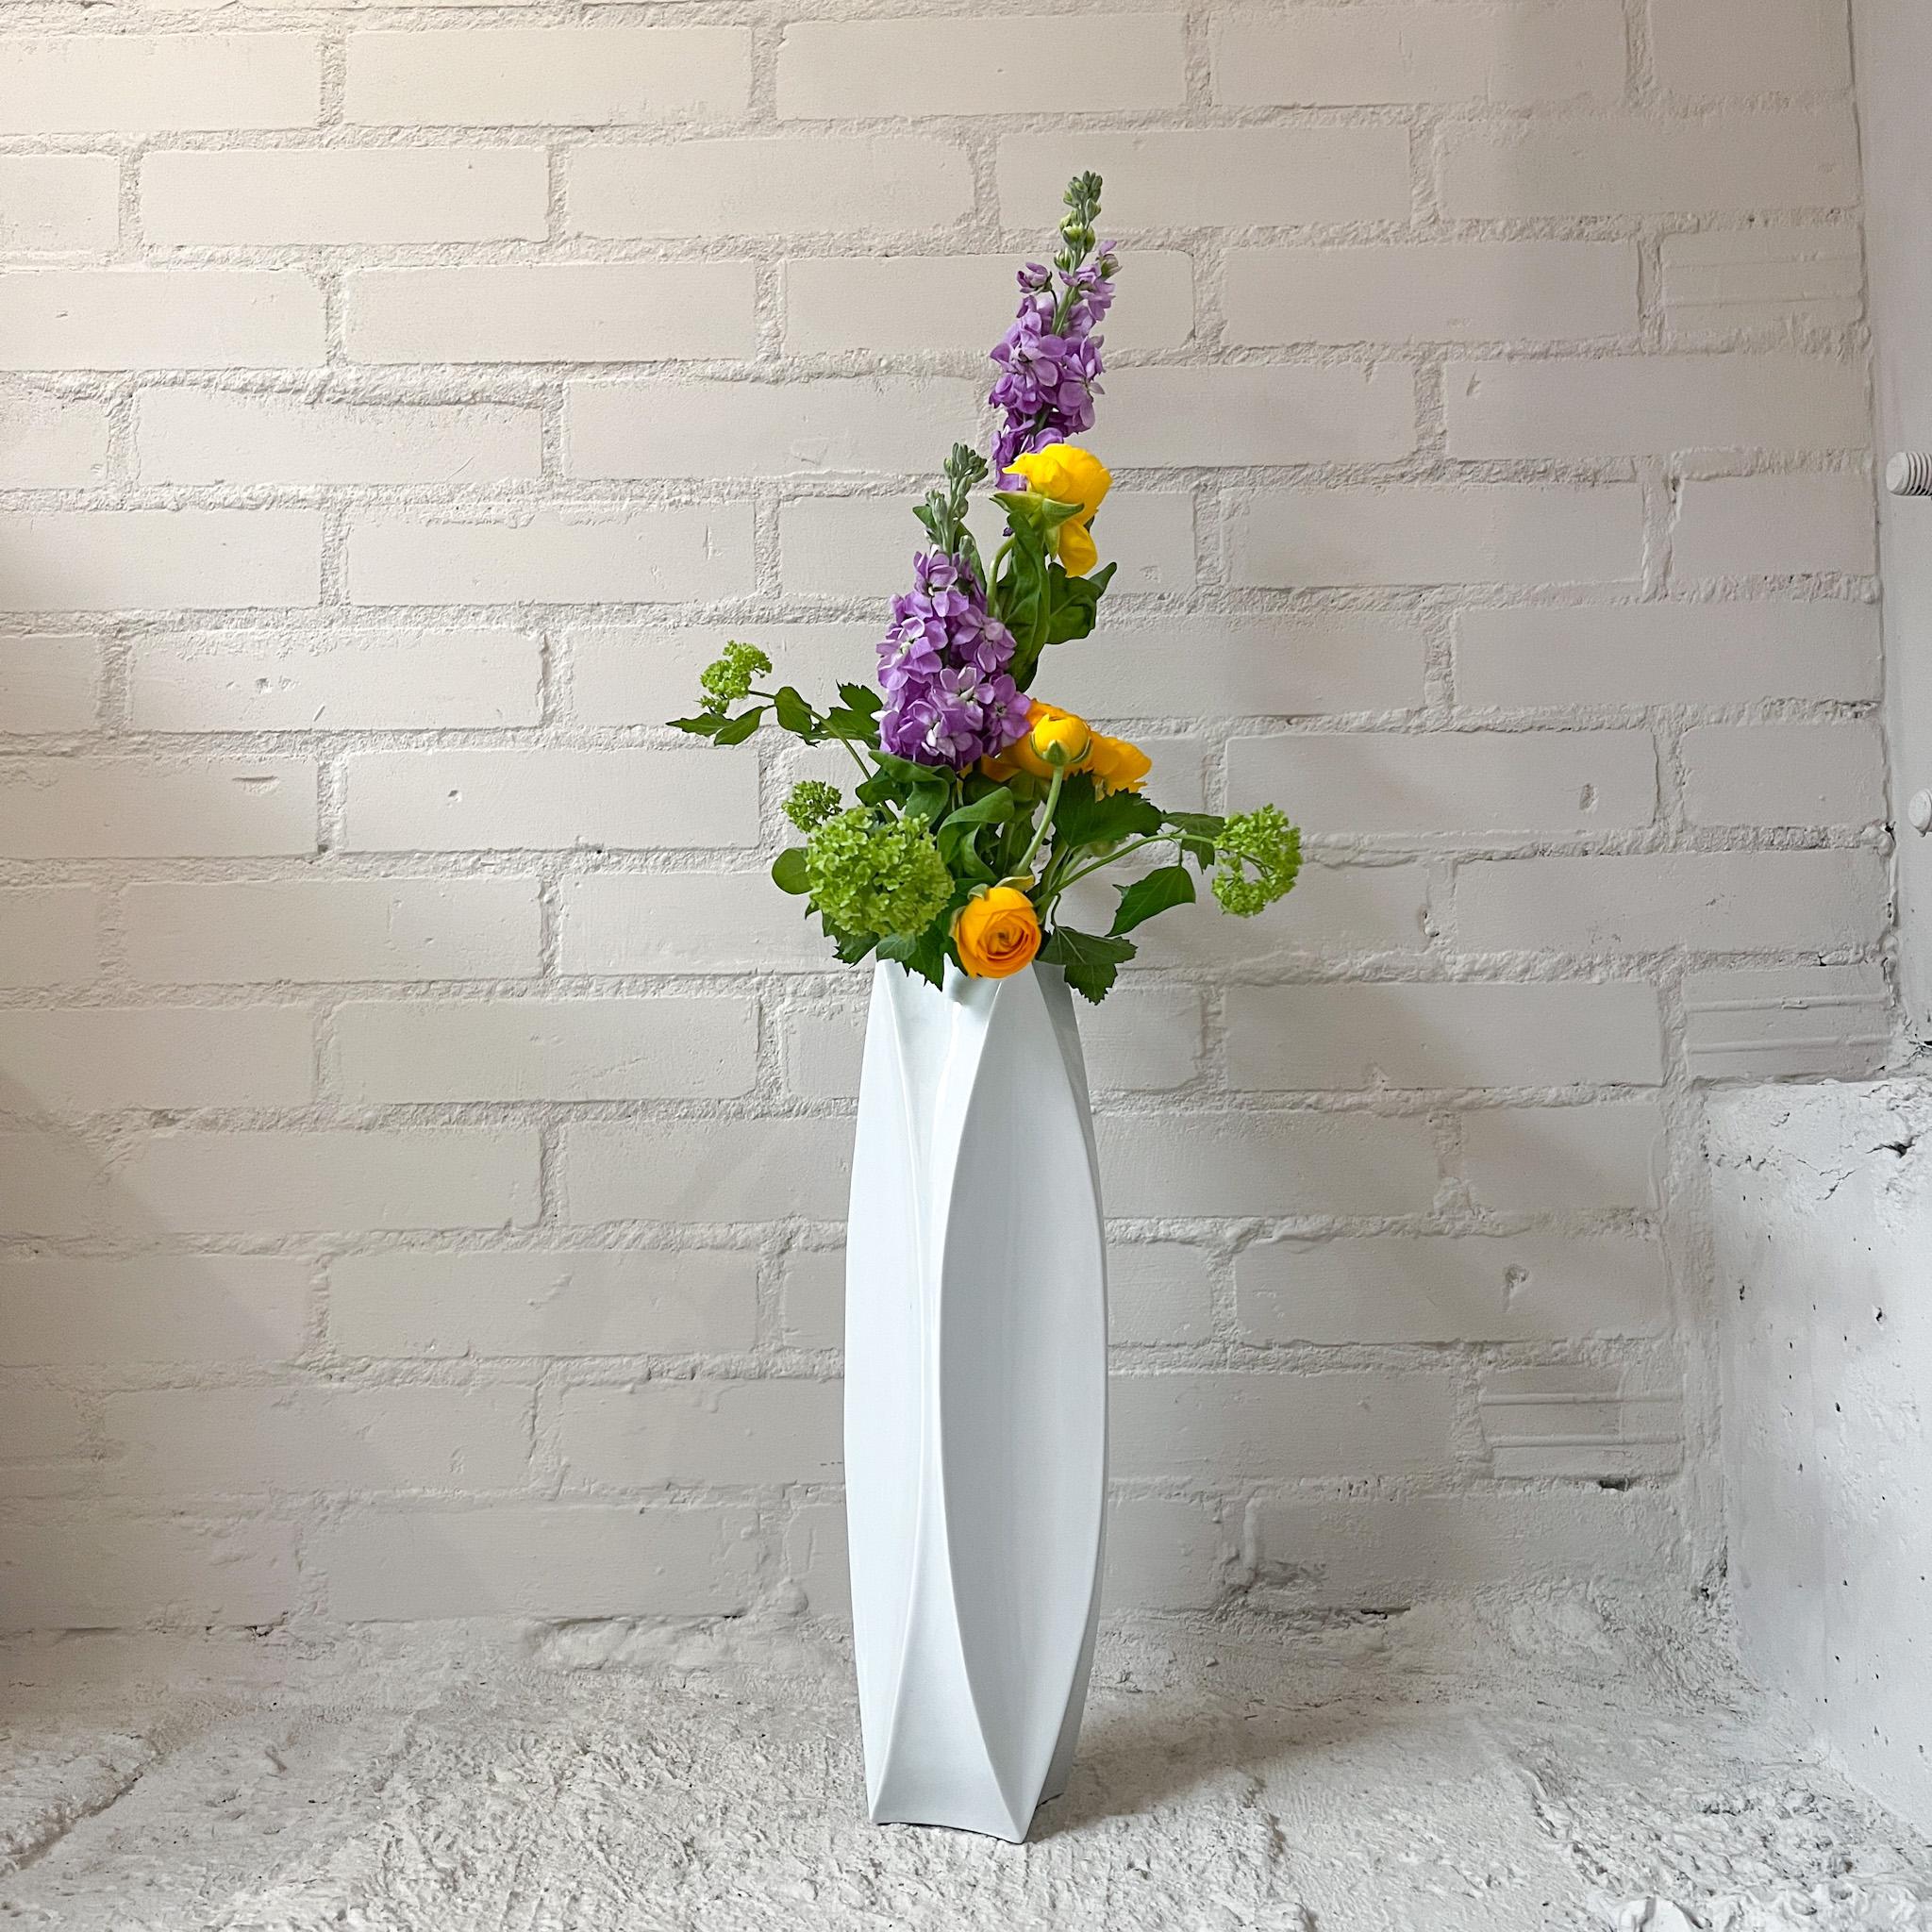 A stunning large vase by Jan van der Vaart (1931-2000). In the mid-1970s till the early 1980s, Jan van de Vaart experimented with vases in folded shapes. This is an exceptional example in an elegant white color. Van der Vaart produced his multiples